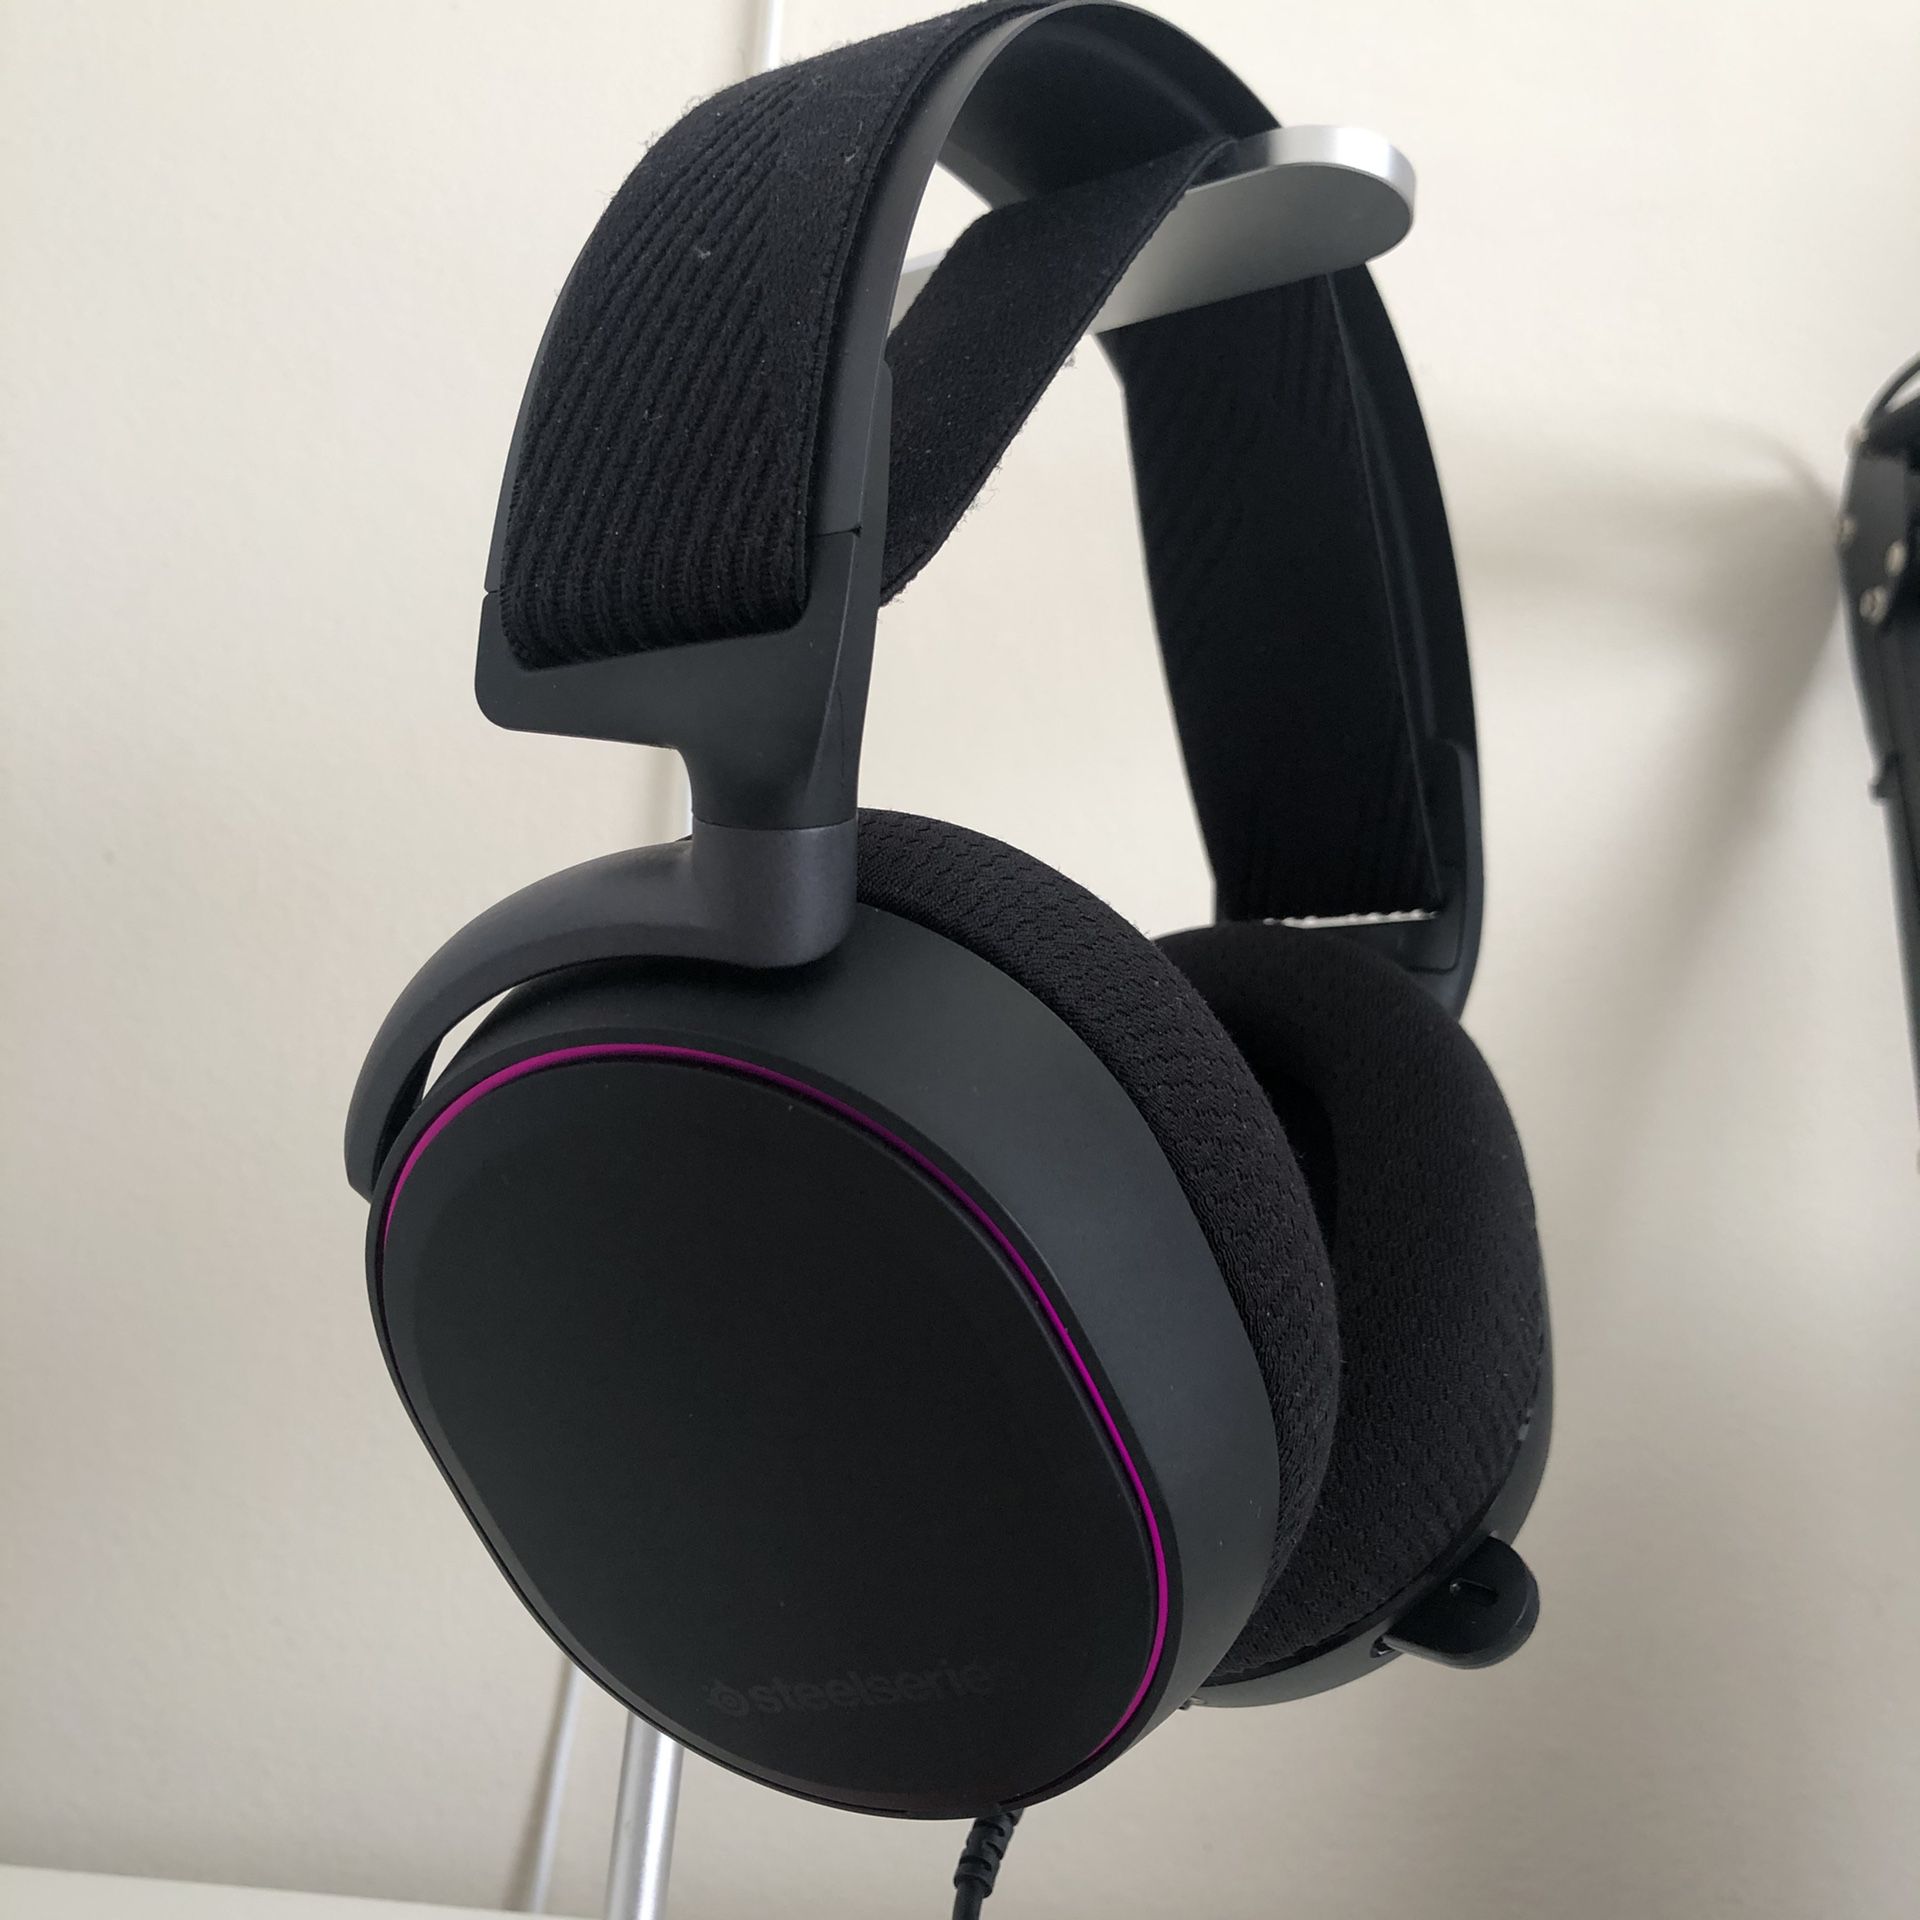 Steelseries Arctis Pro Wired With Gaming Dac + Accessories Included